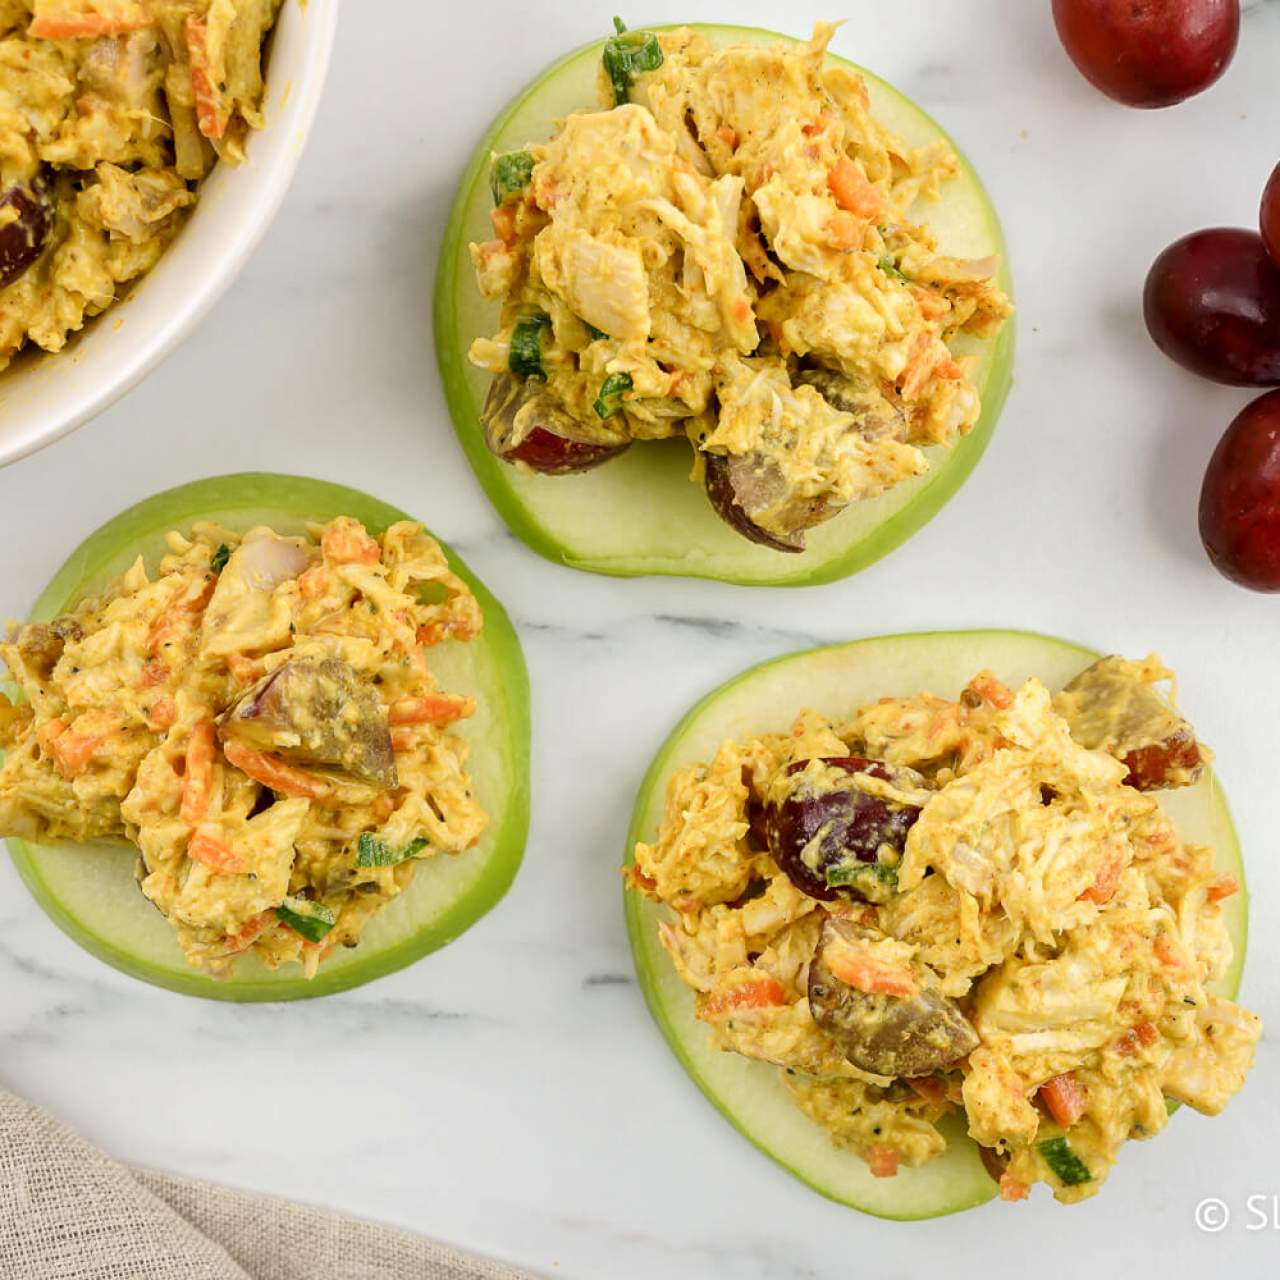 Curry Chicken Salad with Grapes Recipe